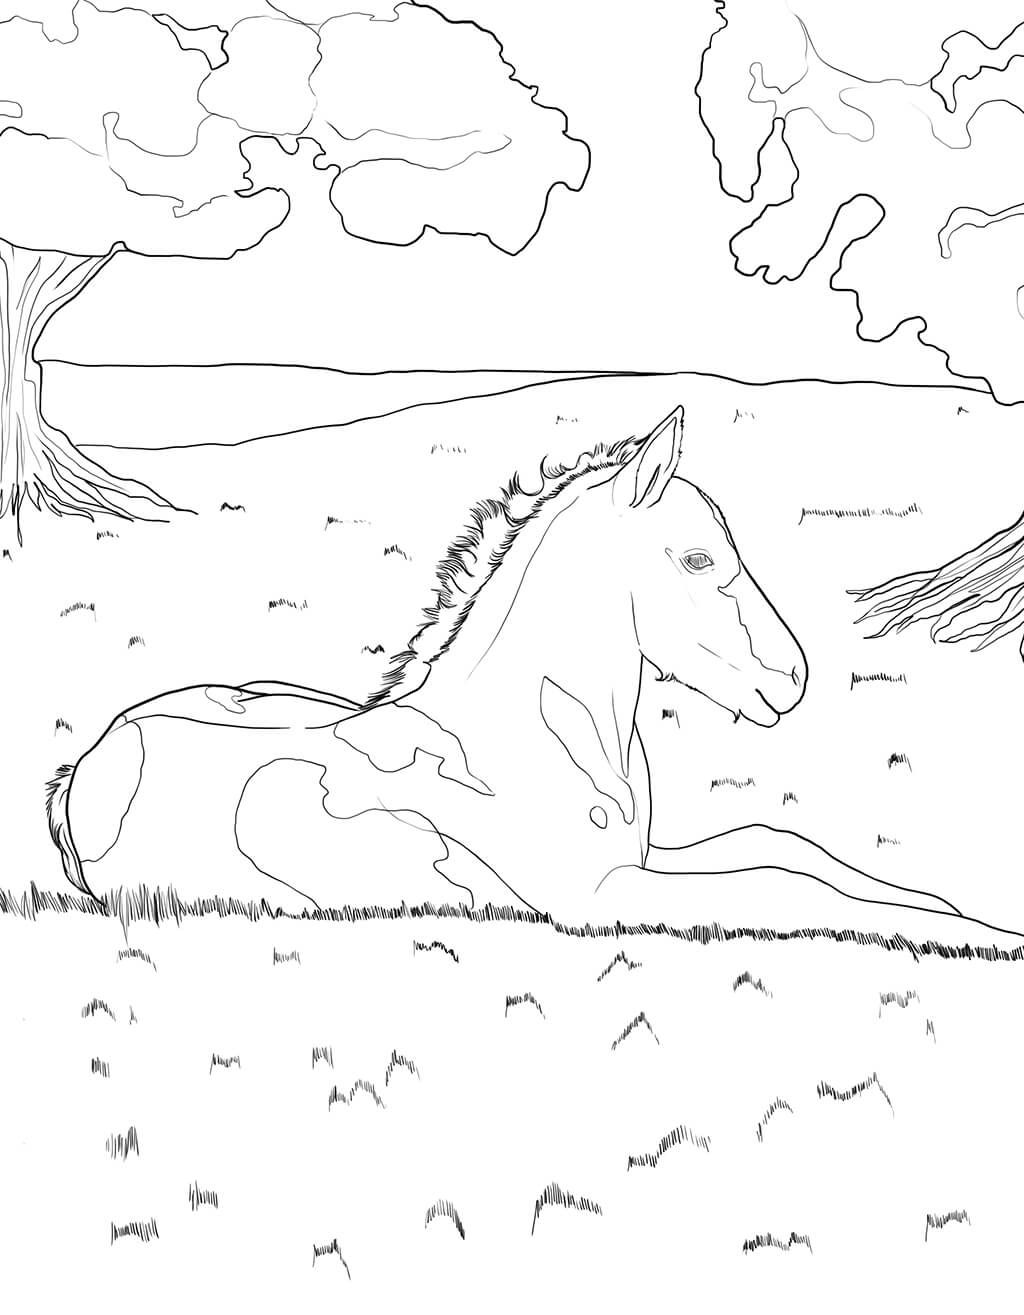 Horse Activity Book for Kids Ages 6-8